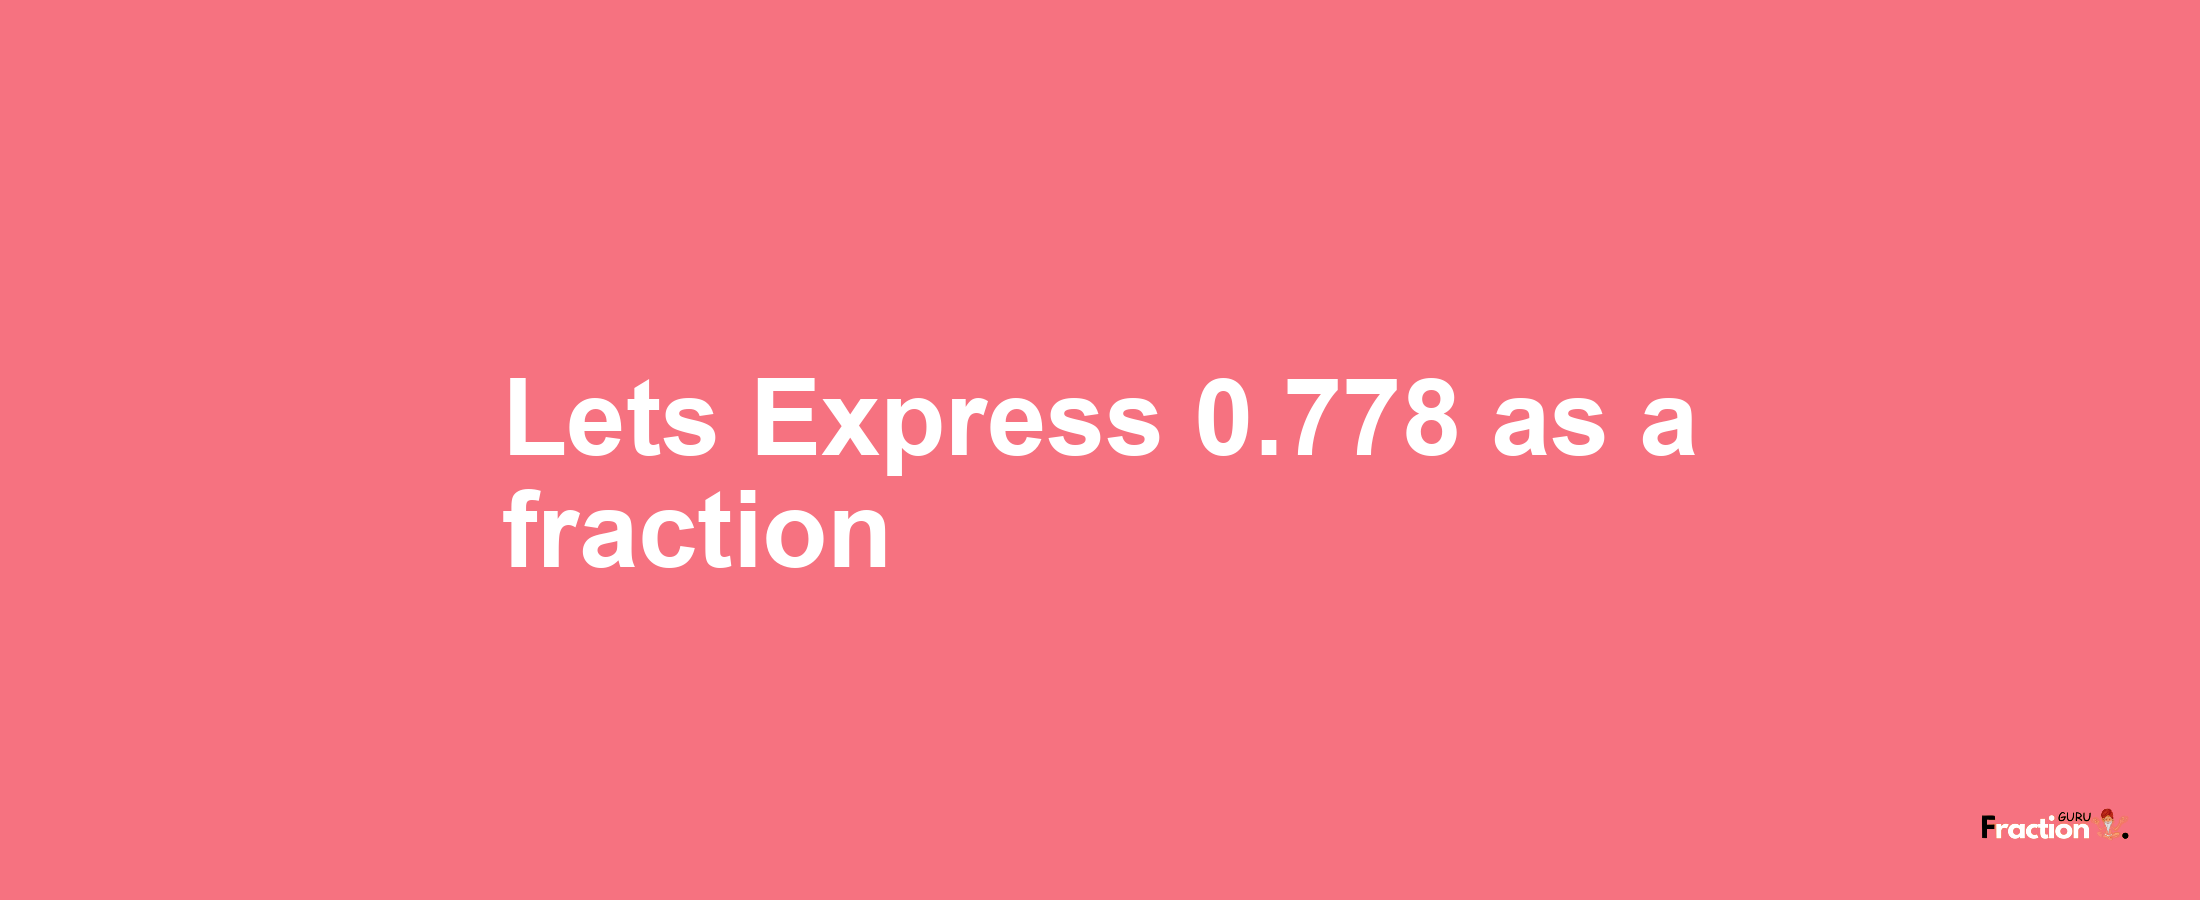 Lets Express 0.778 as afraction